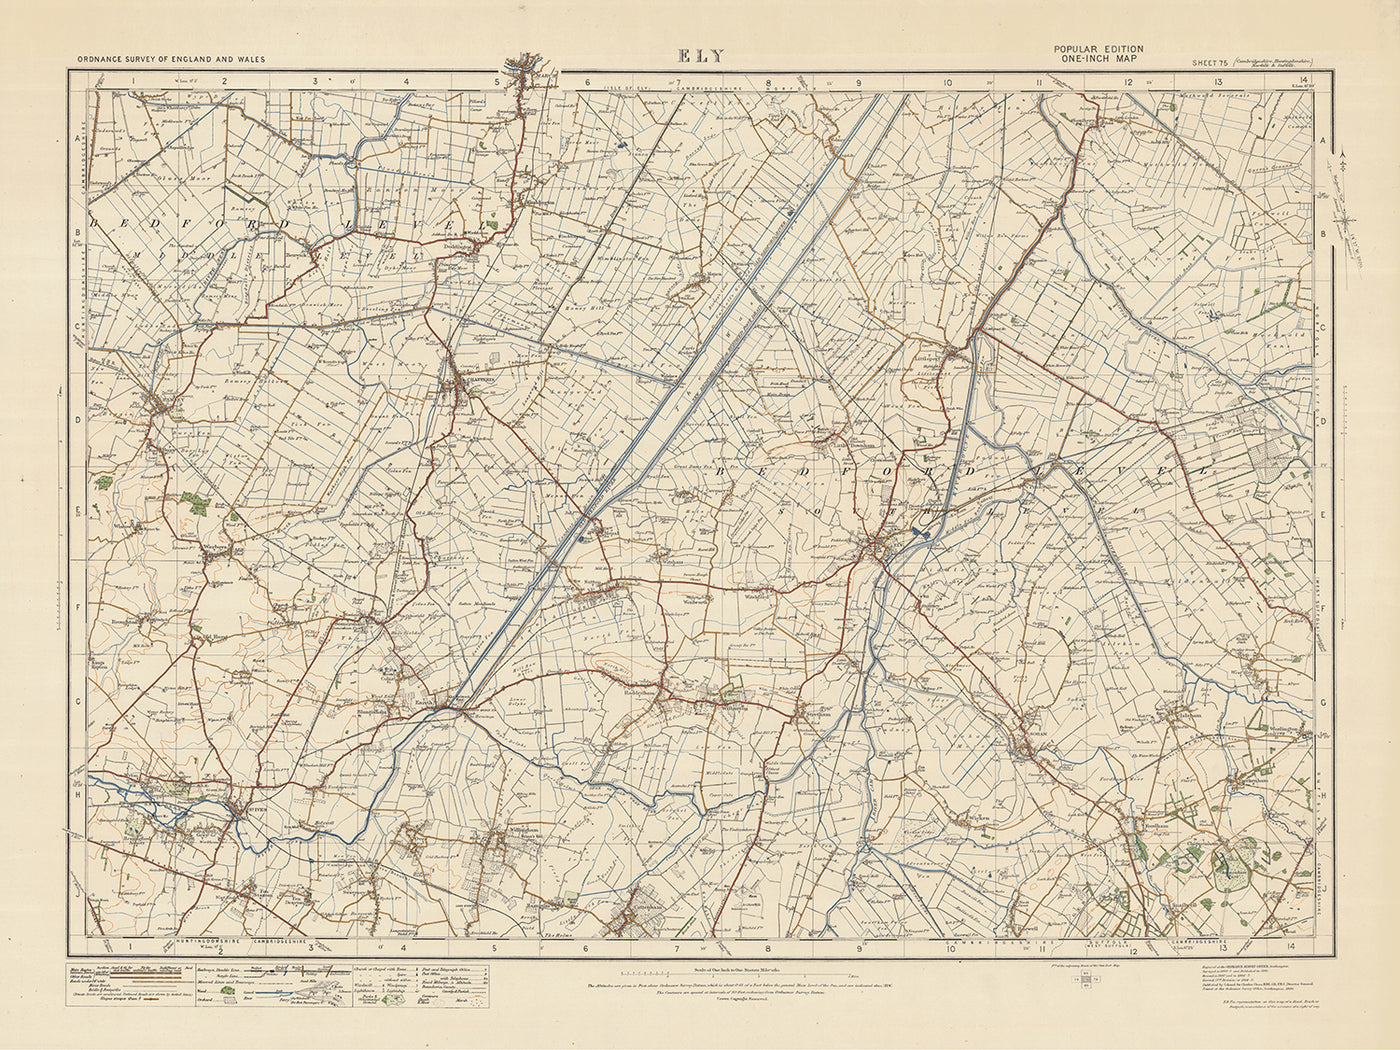 Old Ordnance Survey Map, Sheet 75 - Ely, 1925: Soham, Ramsey, St Ives, Chatteris, March